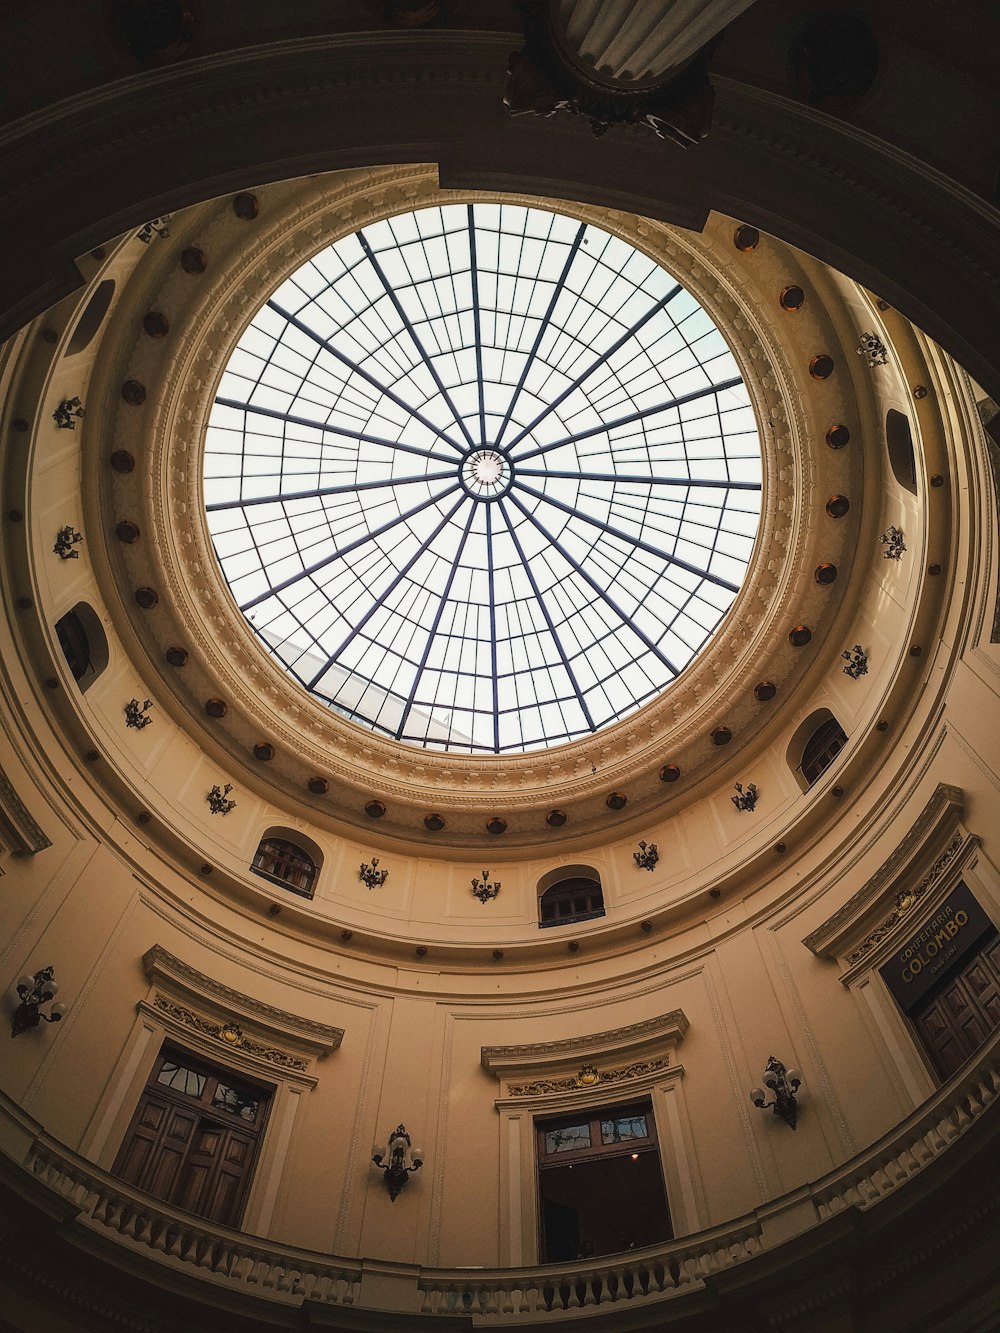 a circular glass ceiling in a building